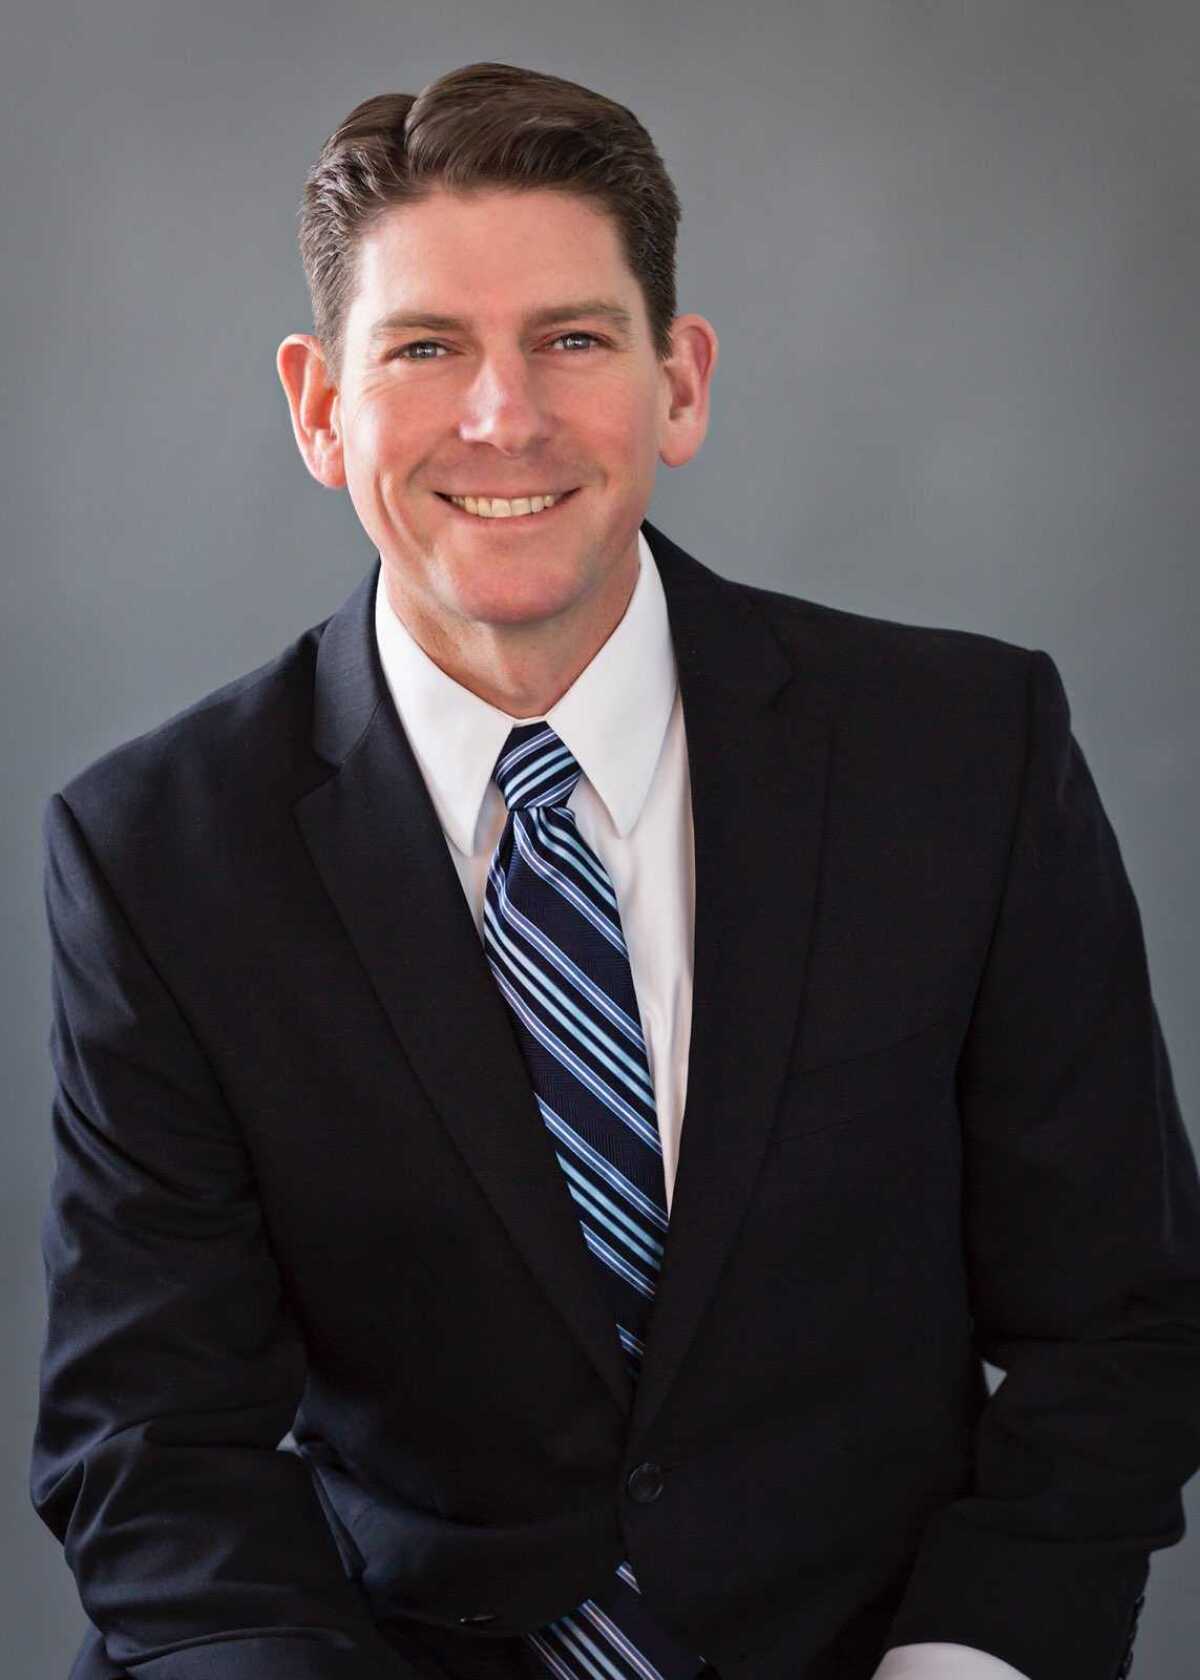 Christian T. Wallis is the Grossmont Healthcare District's new CEO.